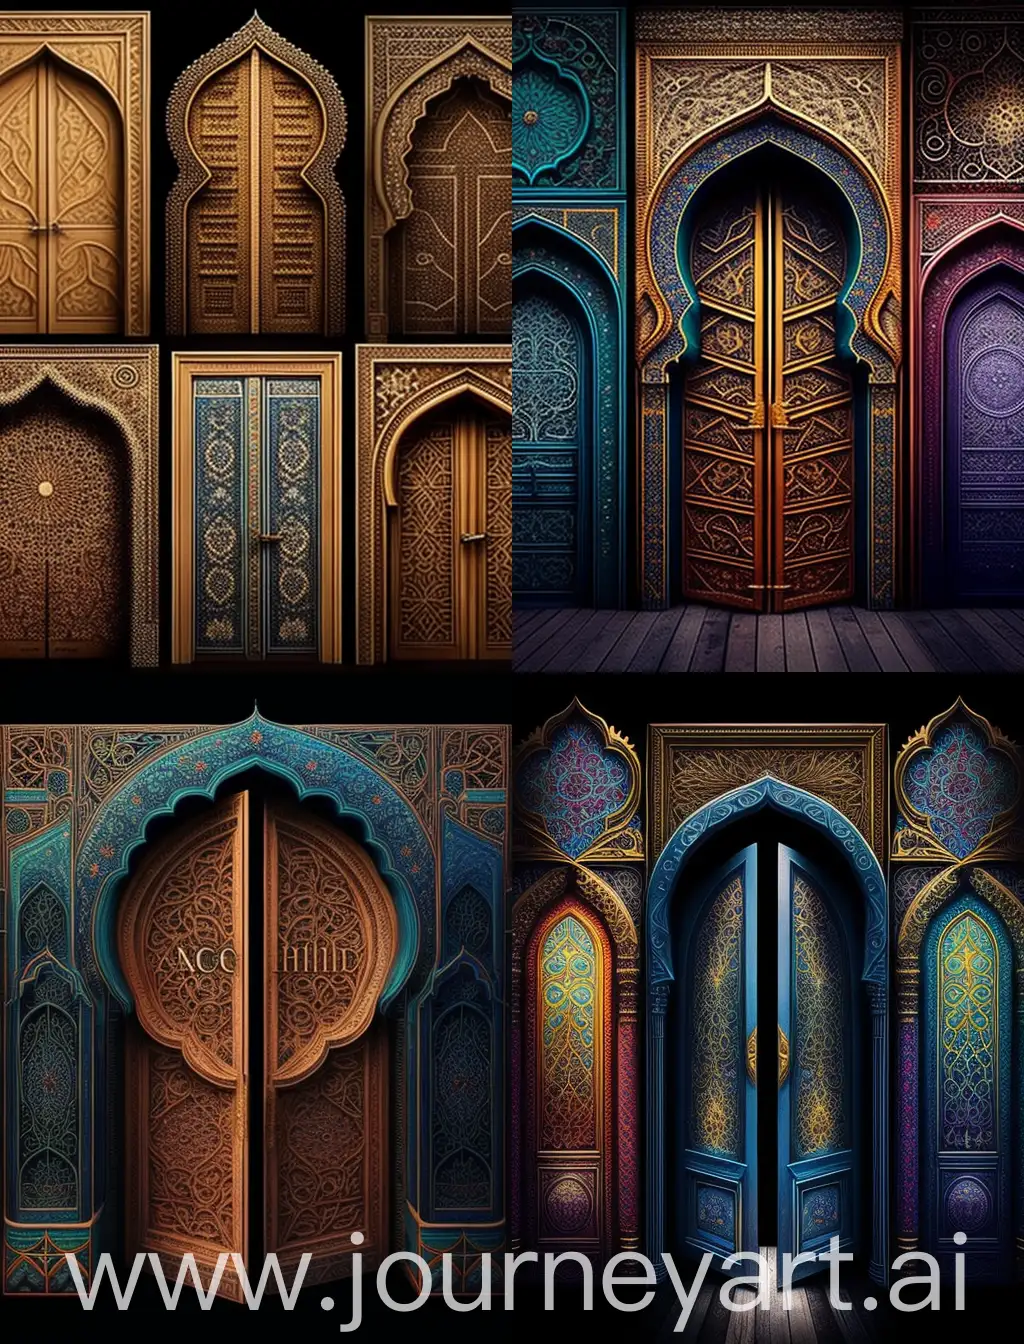 Step into a world of wonder as you stand before five majestic doors, each one boasting its own unique islamic design. Four of these doors remain a mystery, while the fifth invites you to explore its secrets.



